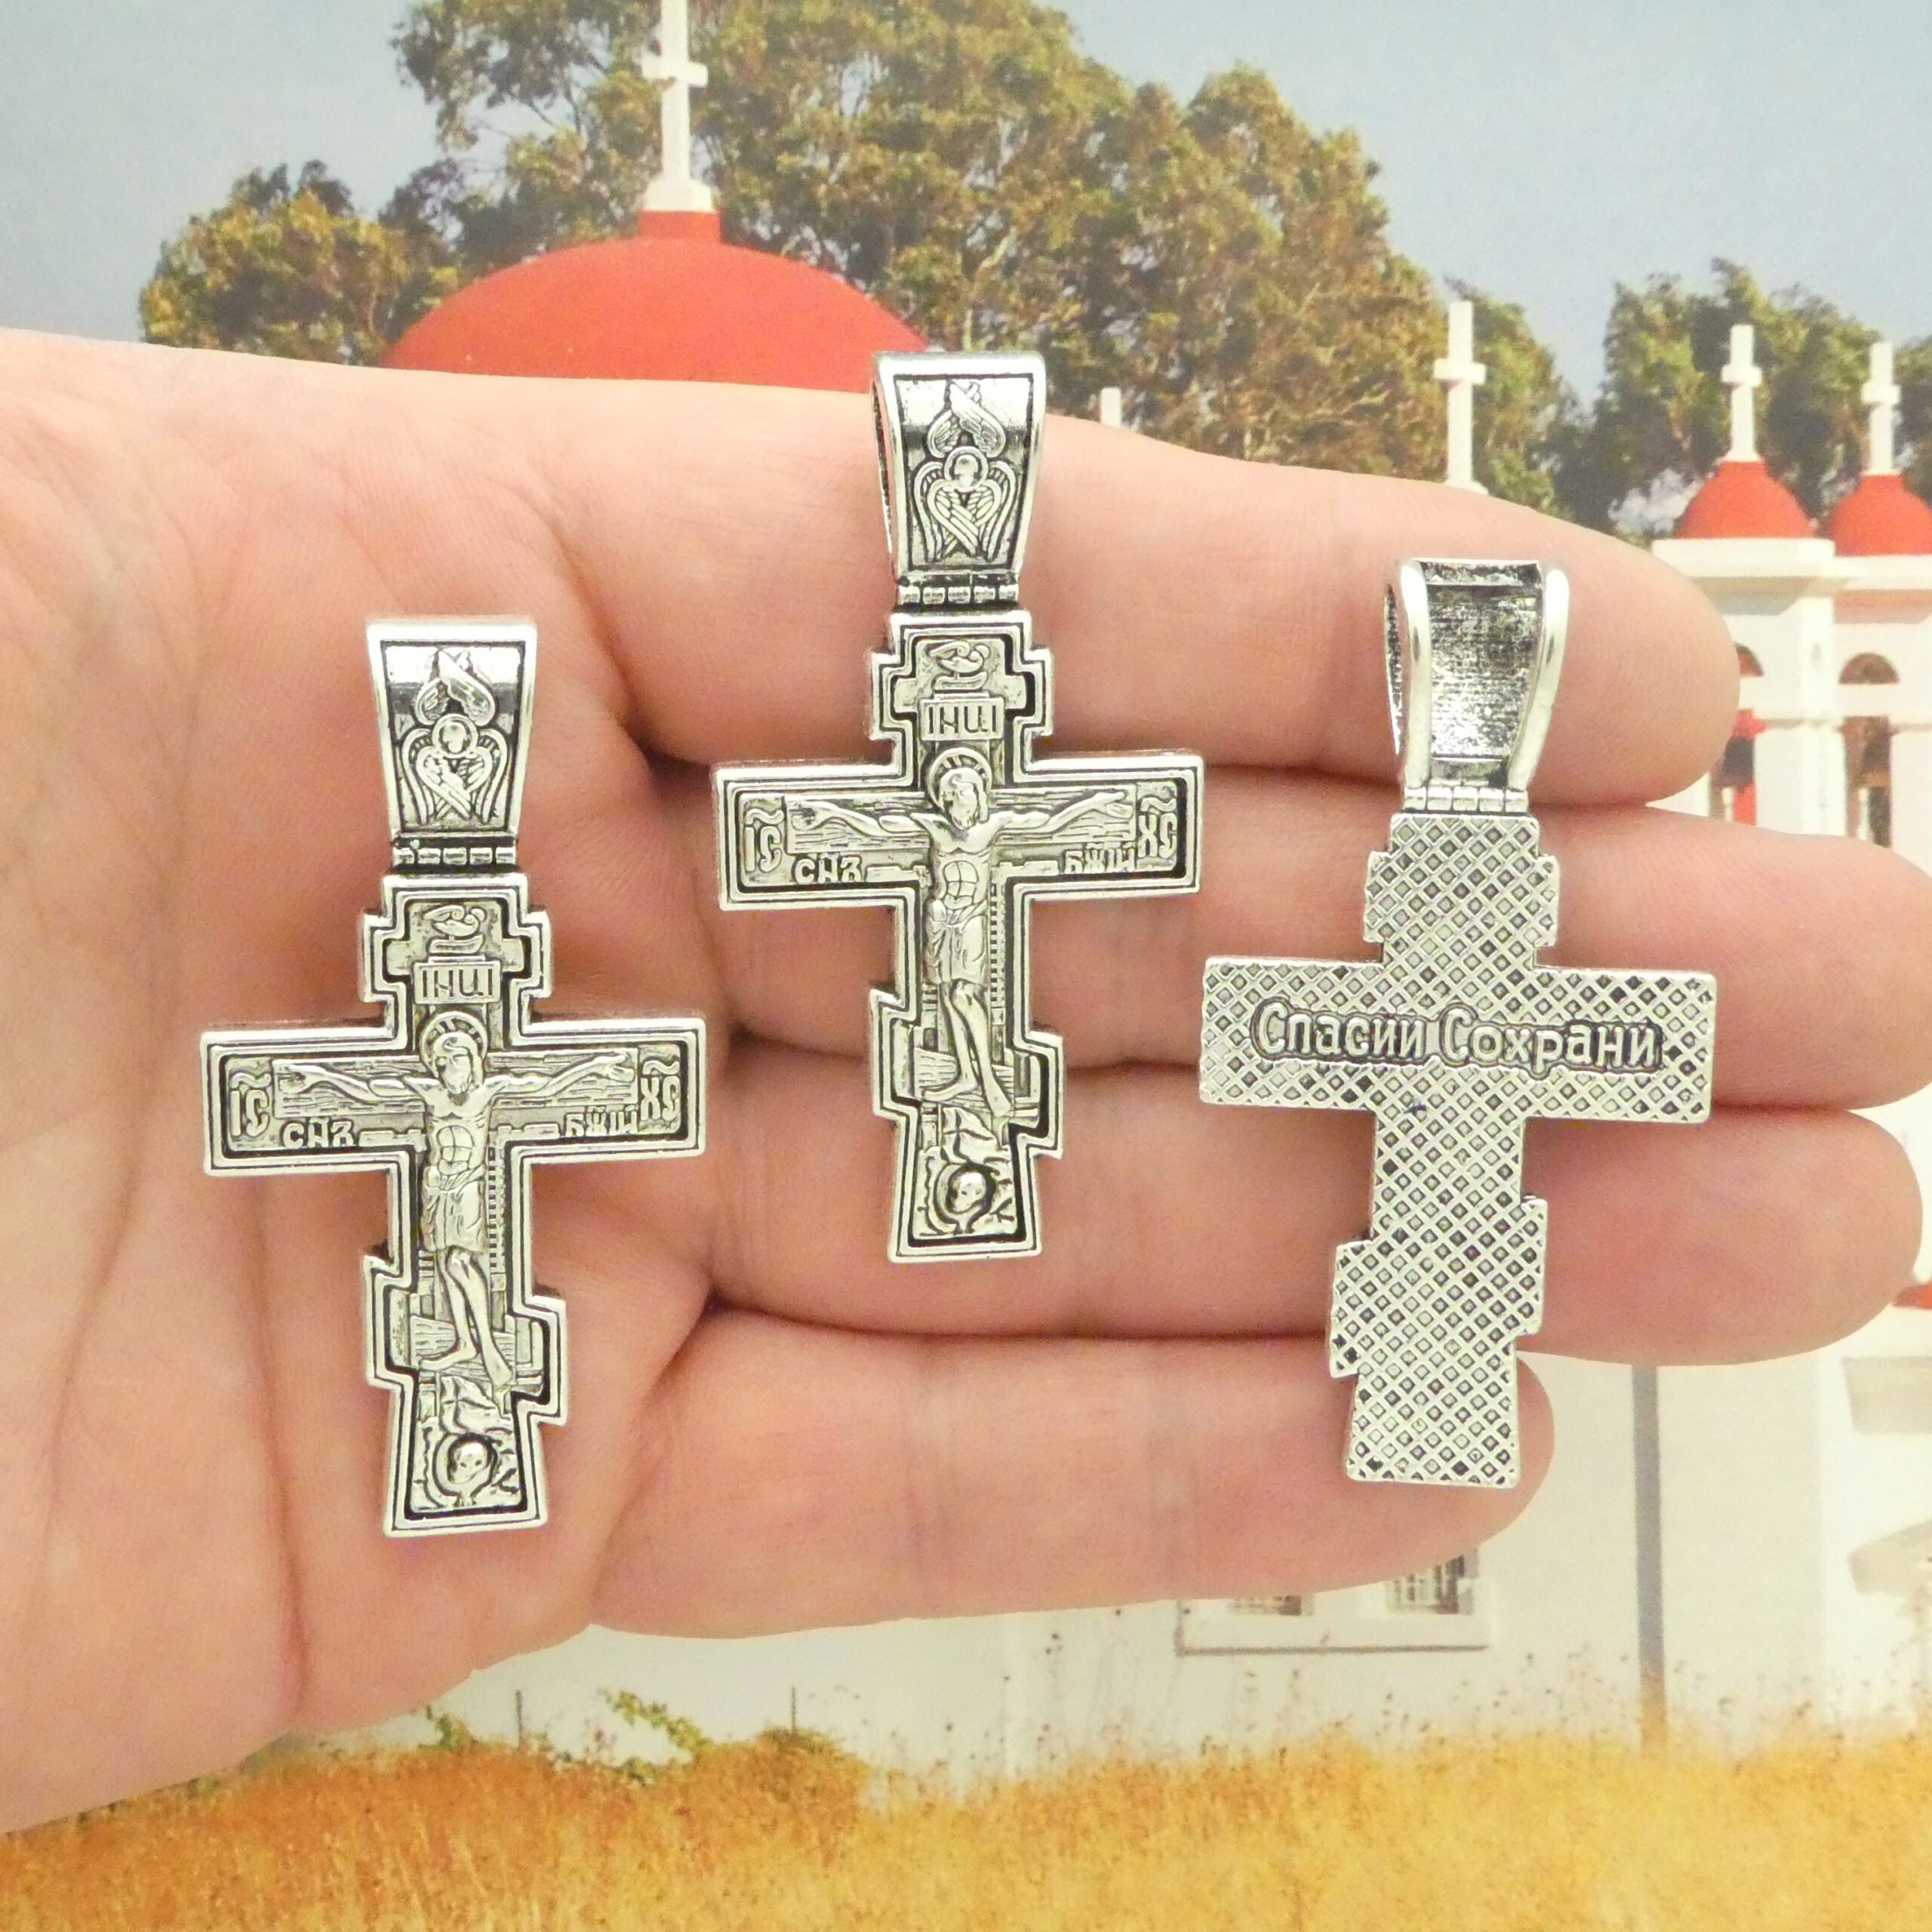 3 Silver Crucifix Cross Charm Rosary Parts by TIJC SP0356